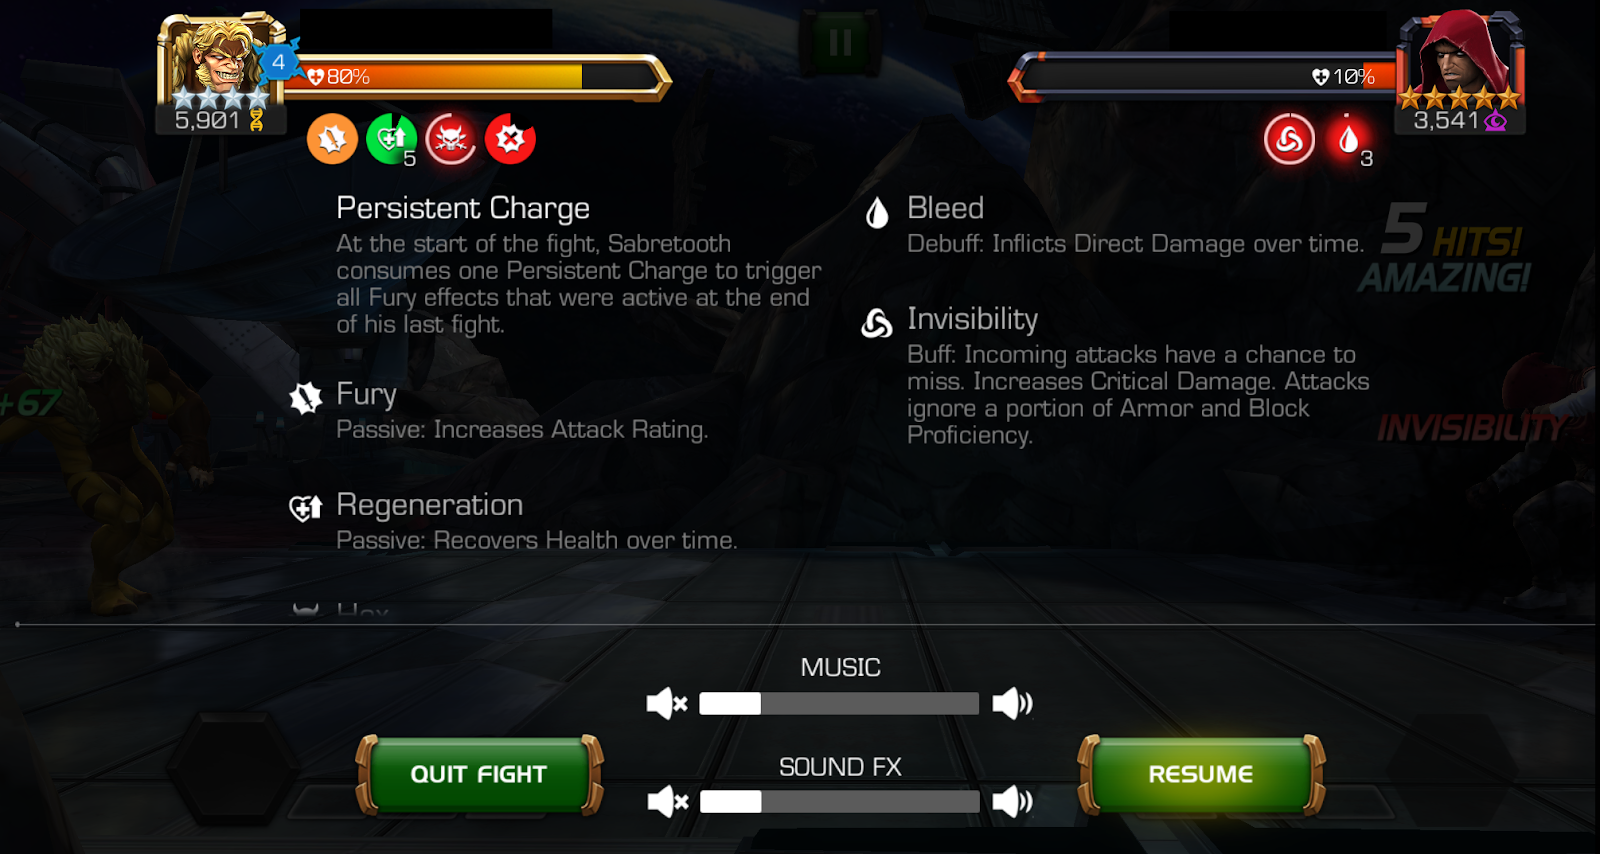 A screenshot showing the display of what the battle screen looks like when it has been paused. The status effects for your champion and your opponent are detailed under their respective health bars.